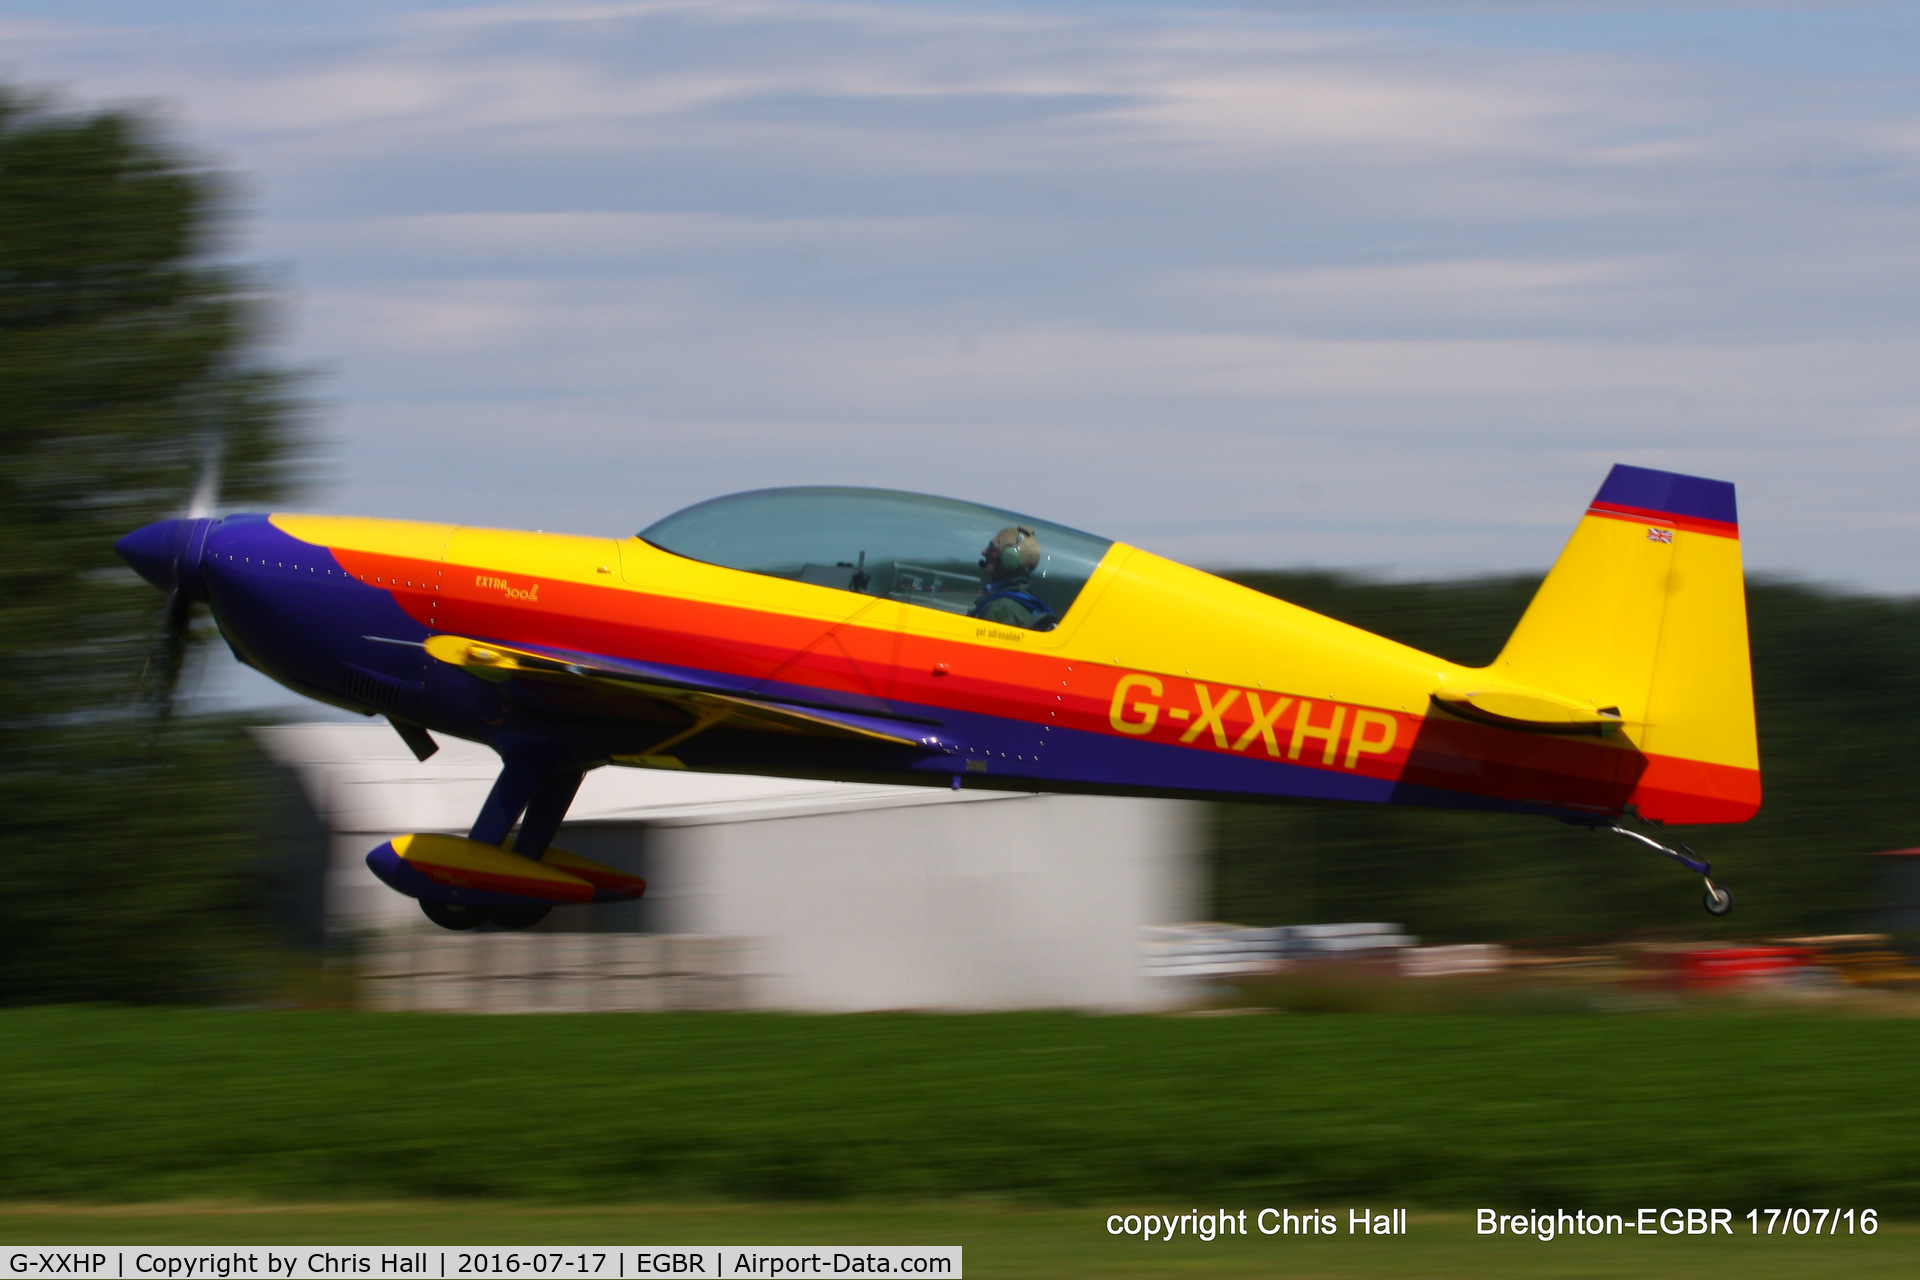 G-XXHP, 2000 Extra EA-300L C/N 203, at Breighton's Summer Fly-in